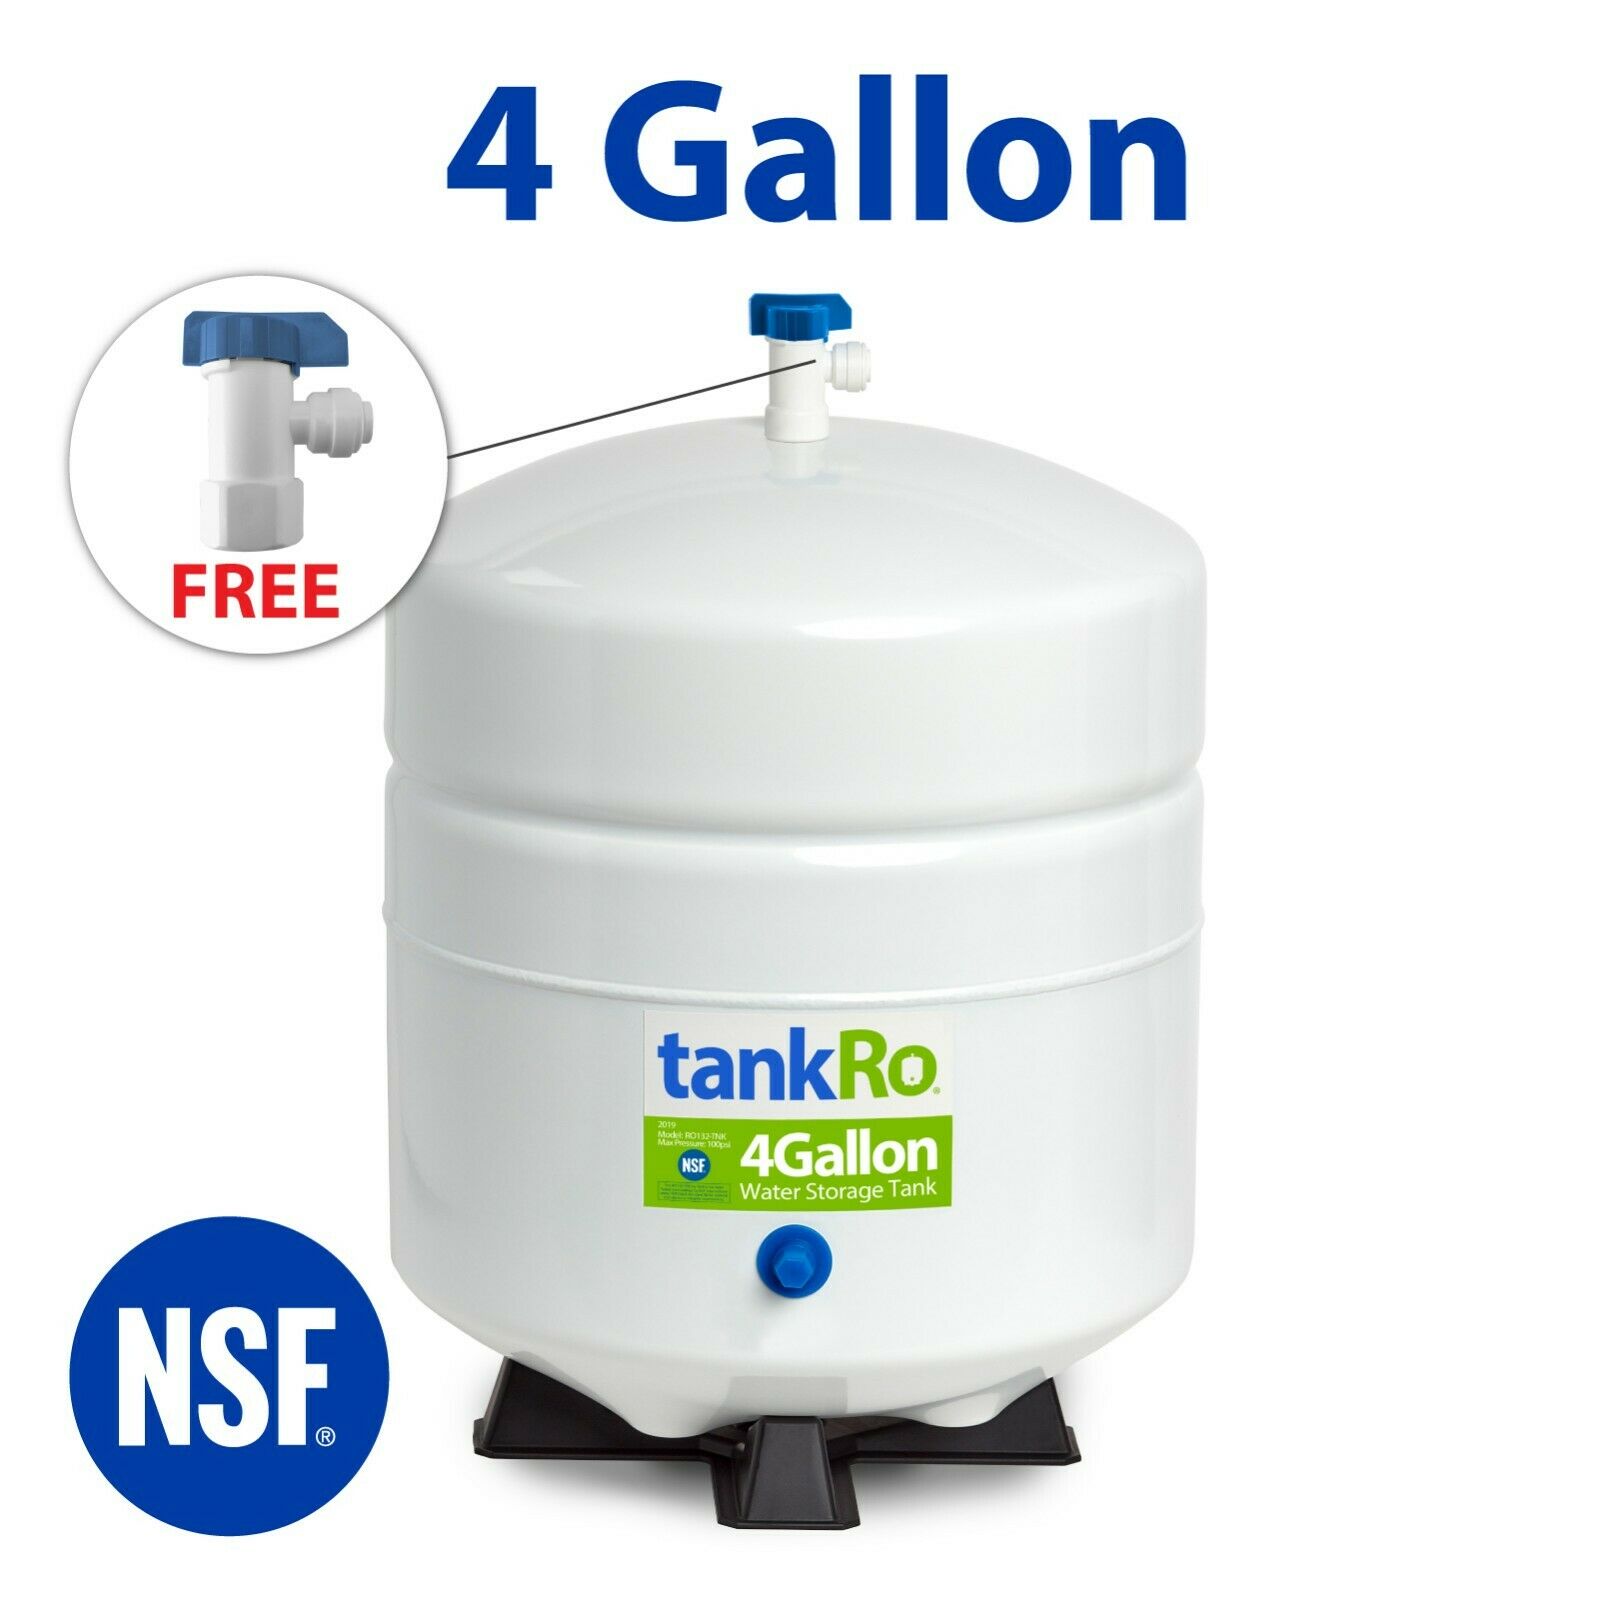 4-gallon Pressurized Water Storage Tank Ro Systems Nsf Certified 1/4" Ball Valve